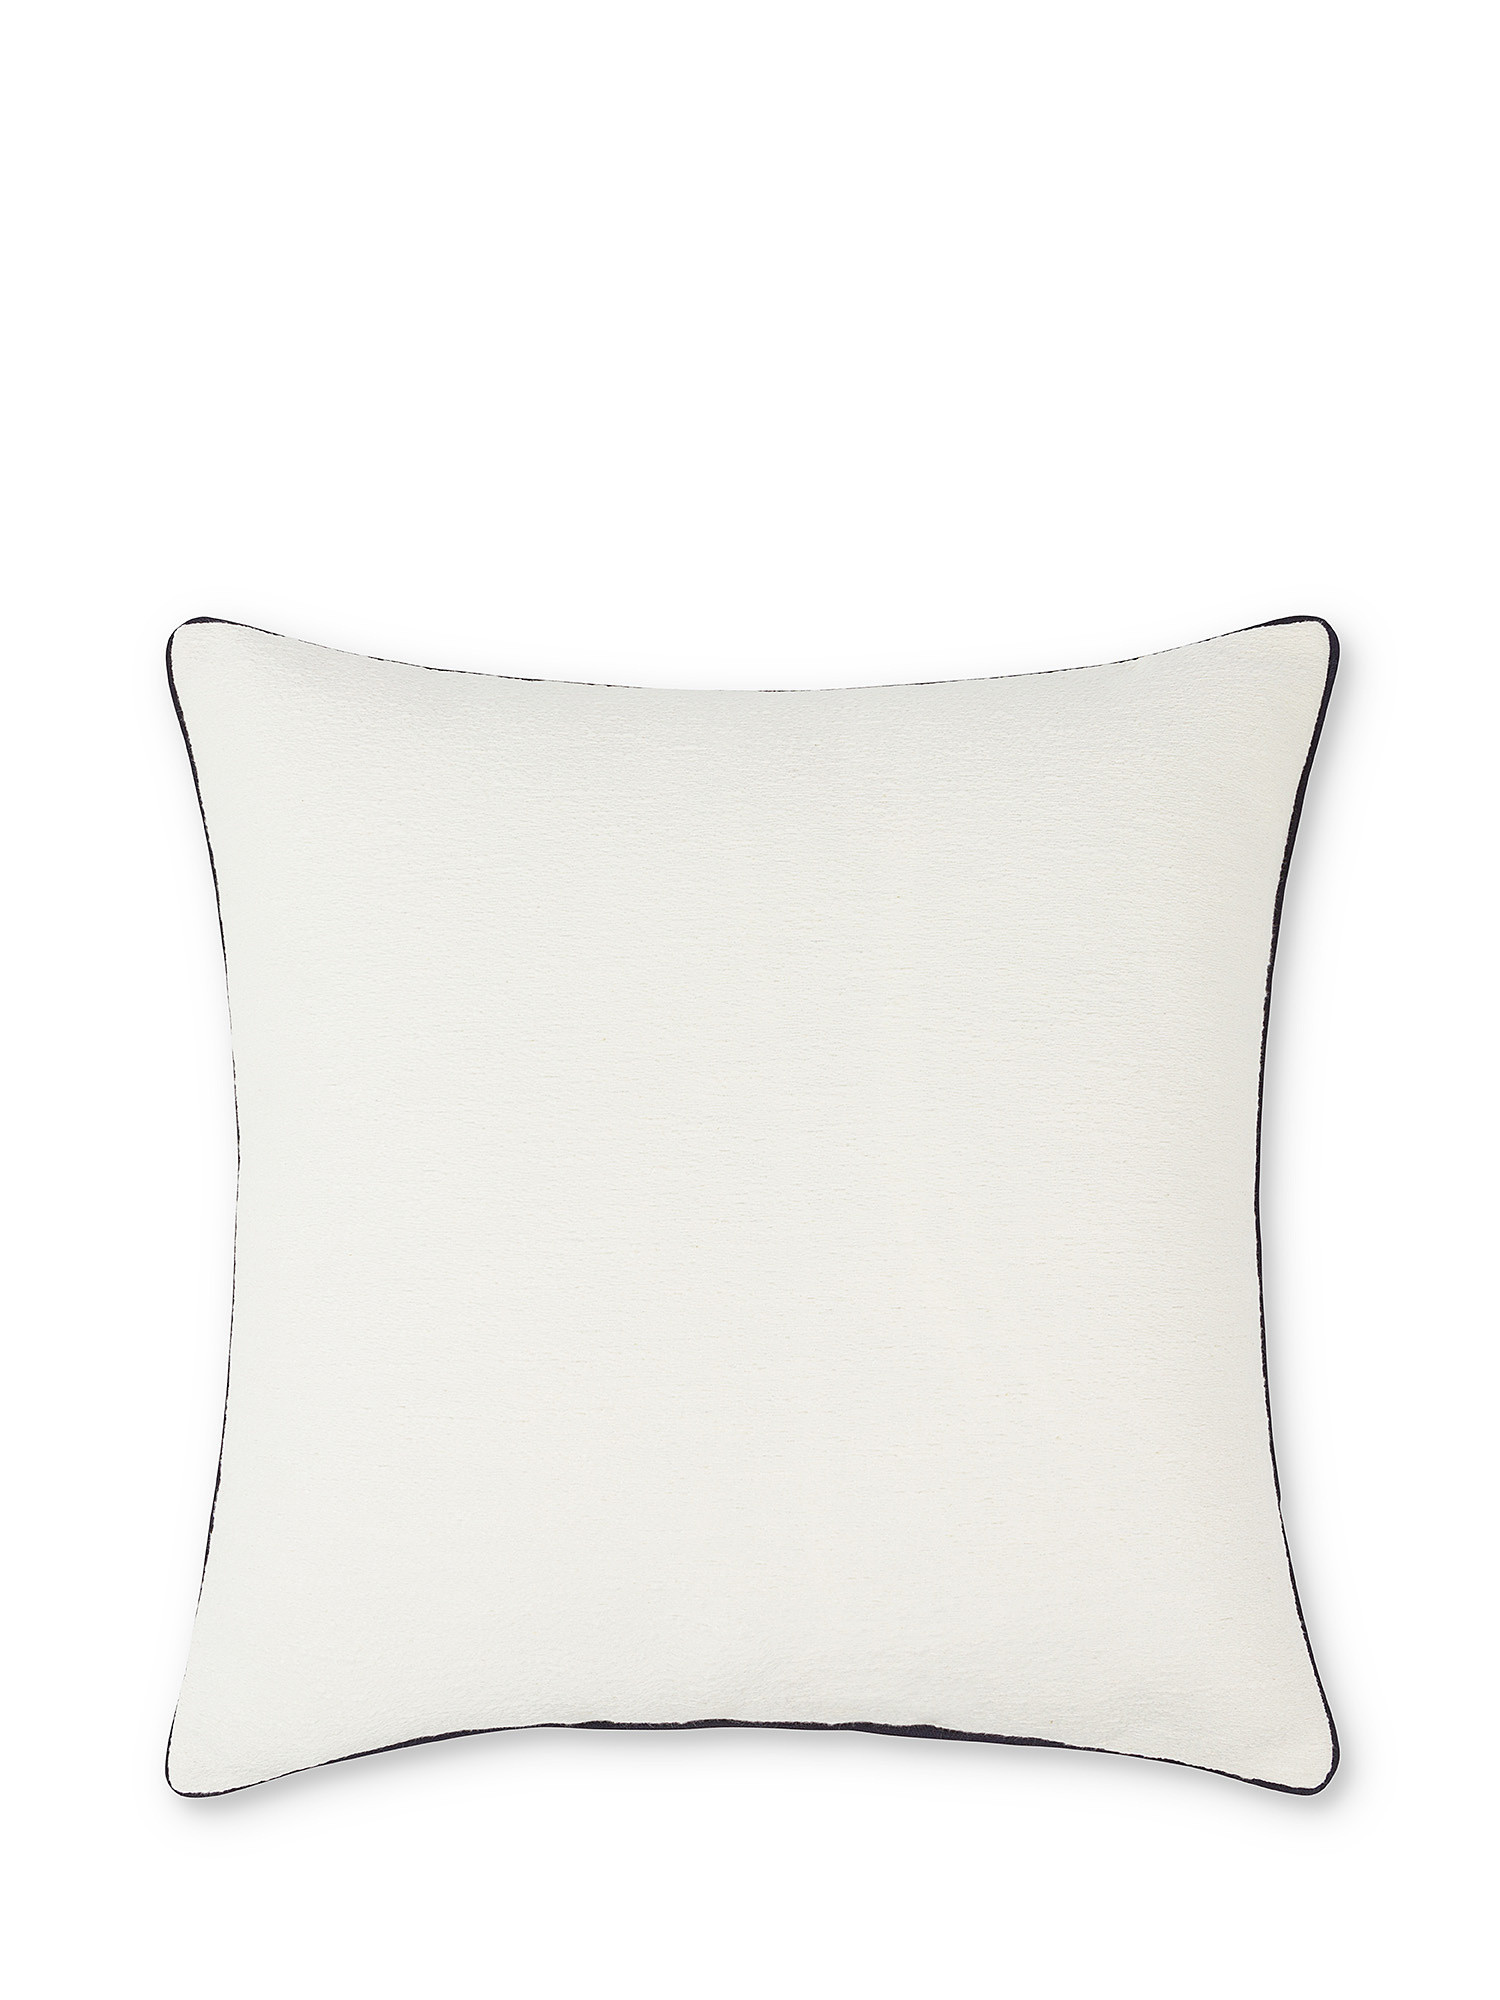 Solid color fabric cushion 45x45cm, White, large image number 0